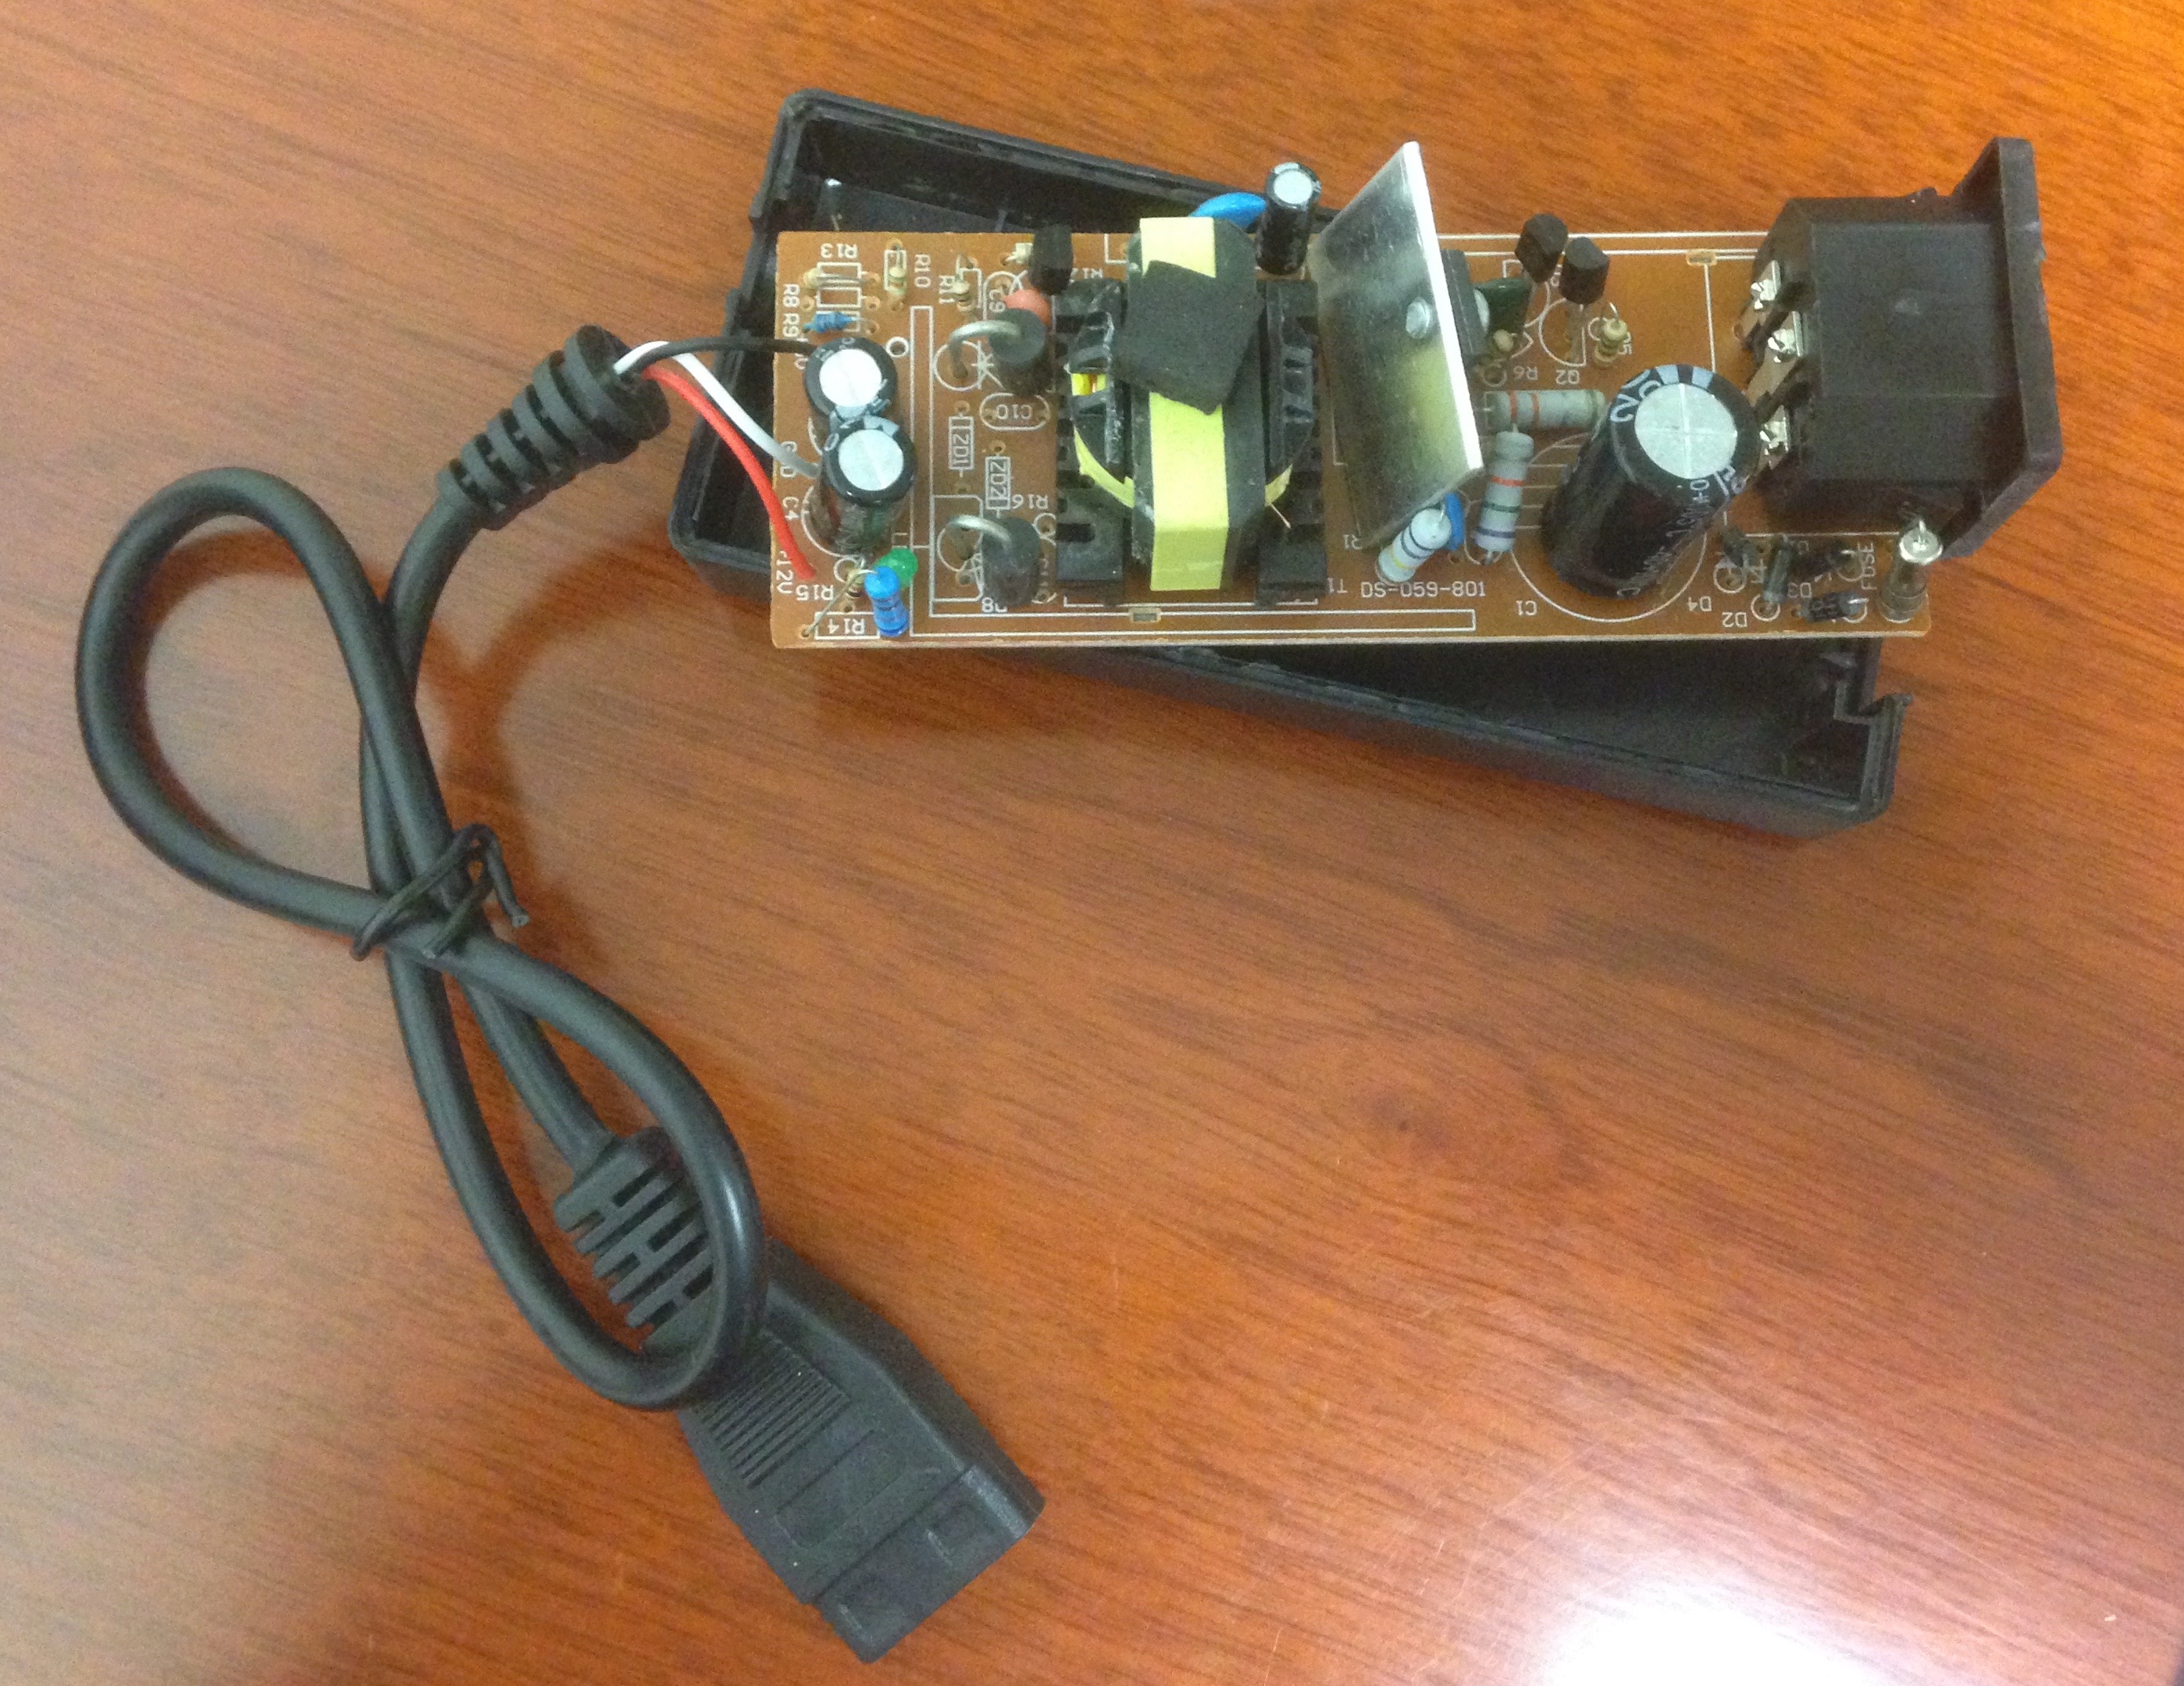 Internals of replacement power supply